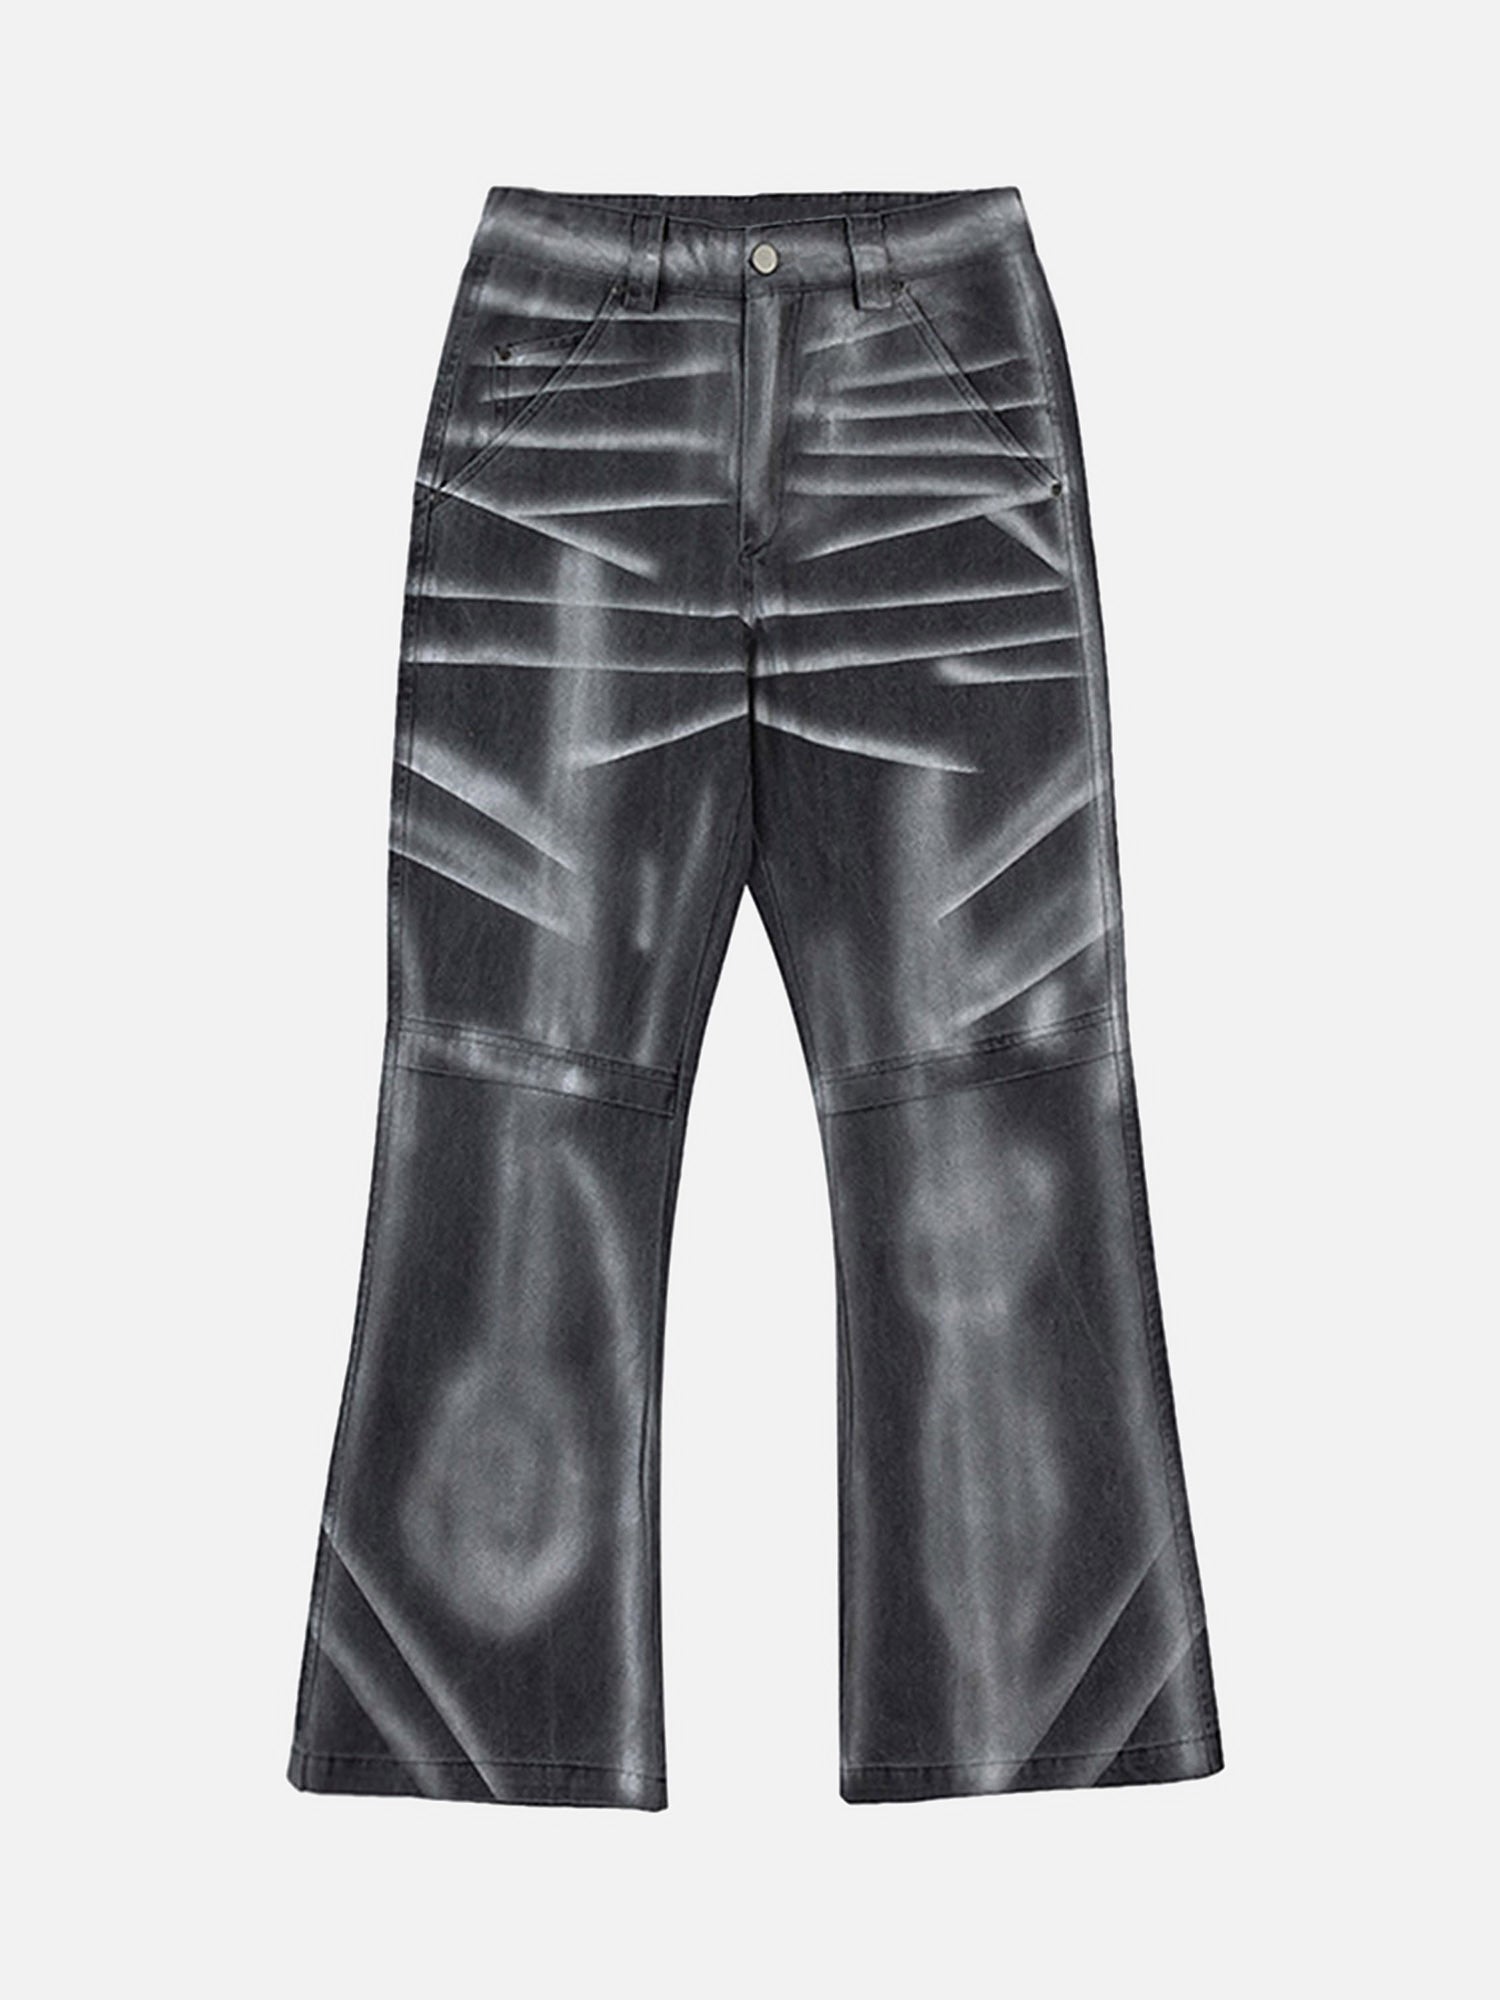 Thesupermade Airbrushed Denim Bell Bottoms